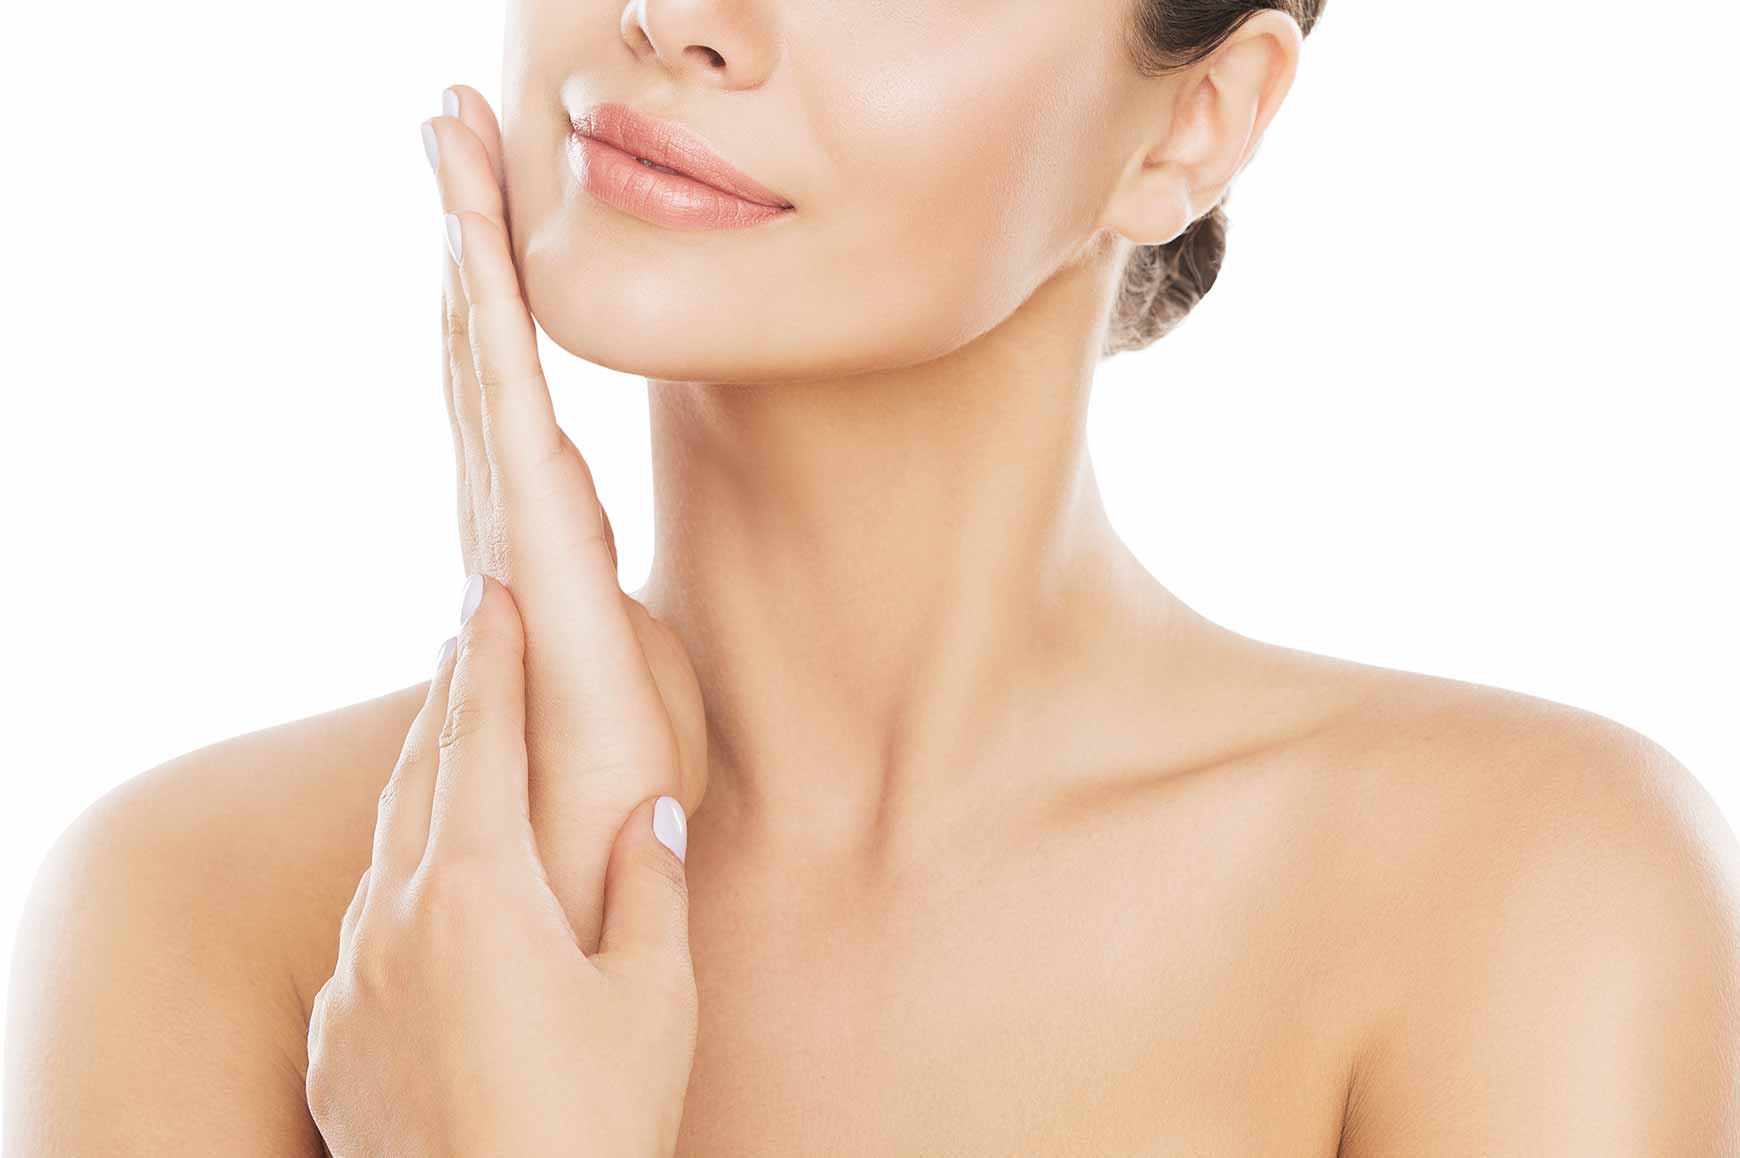 Retin-A skincare medication helps improve the appearance of fine lines, dark spots, and surface wrinkles. Contact Dr. Melissa Marks to find out more.